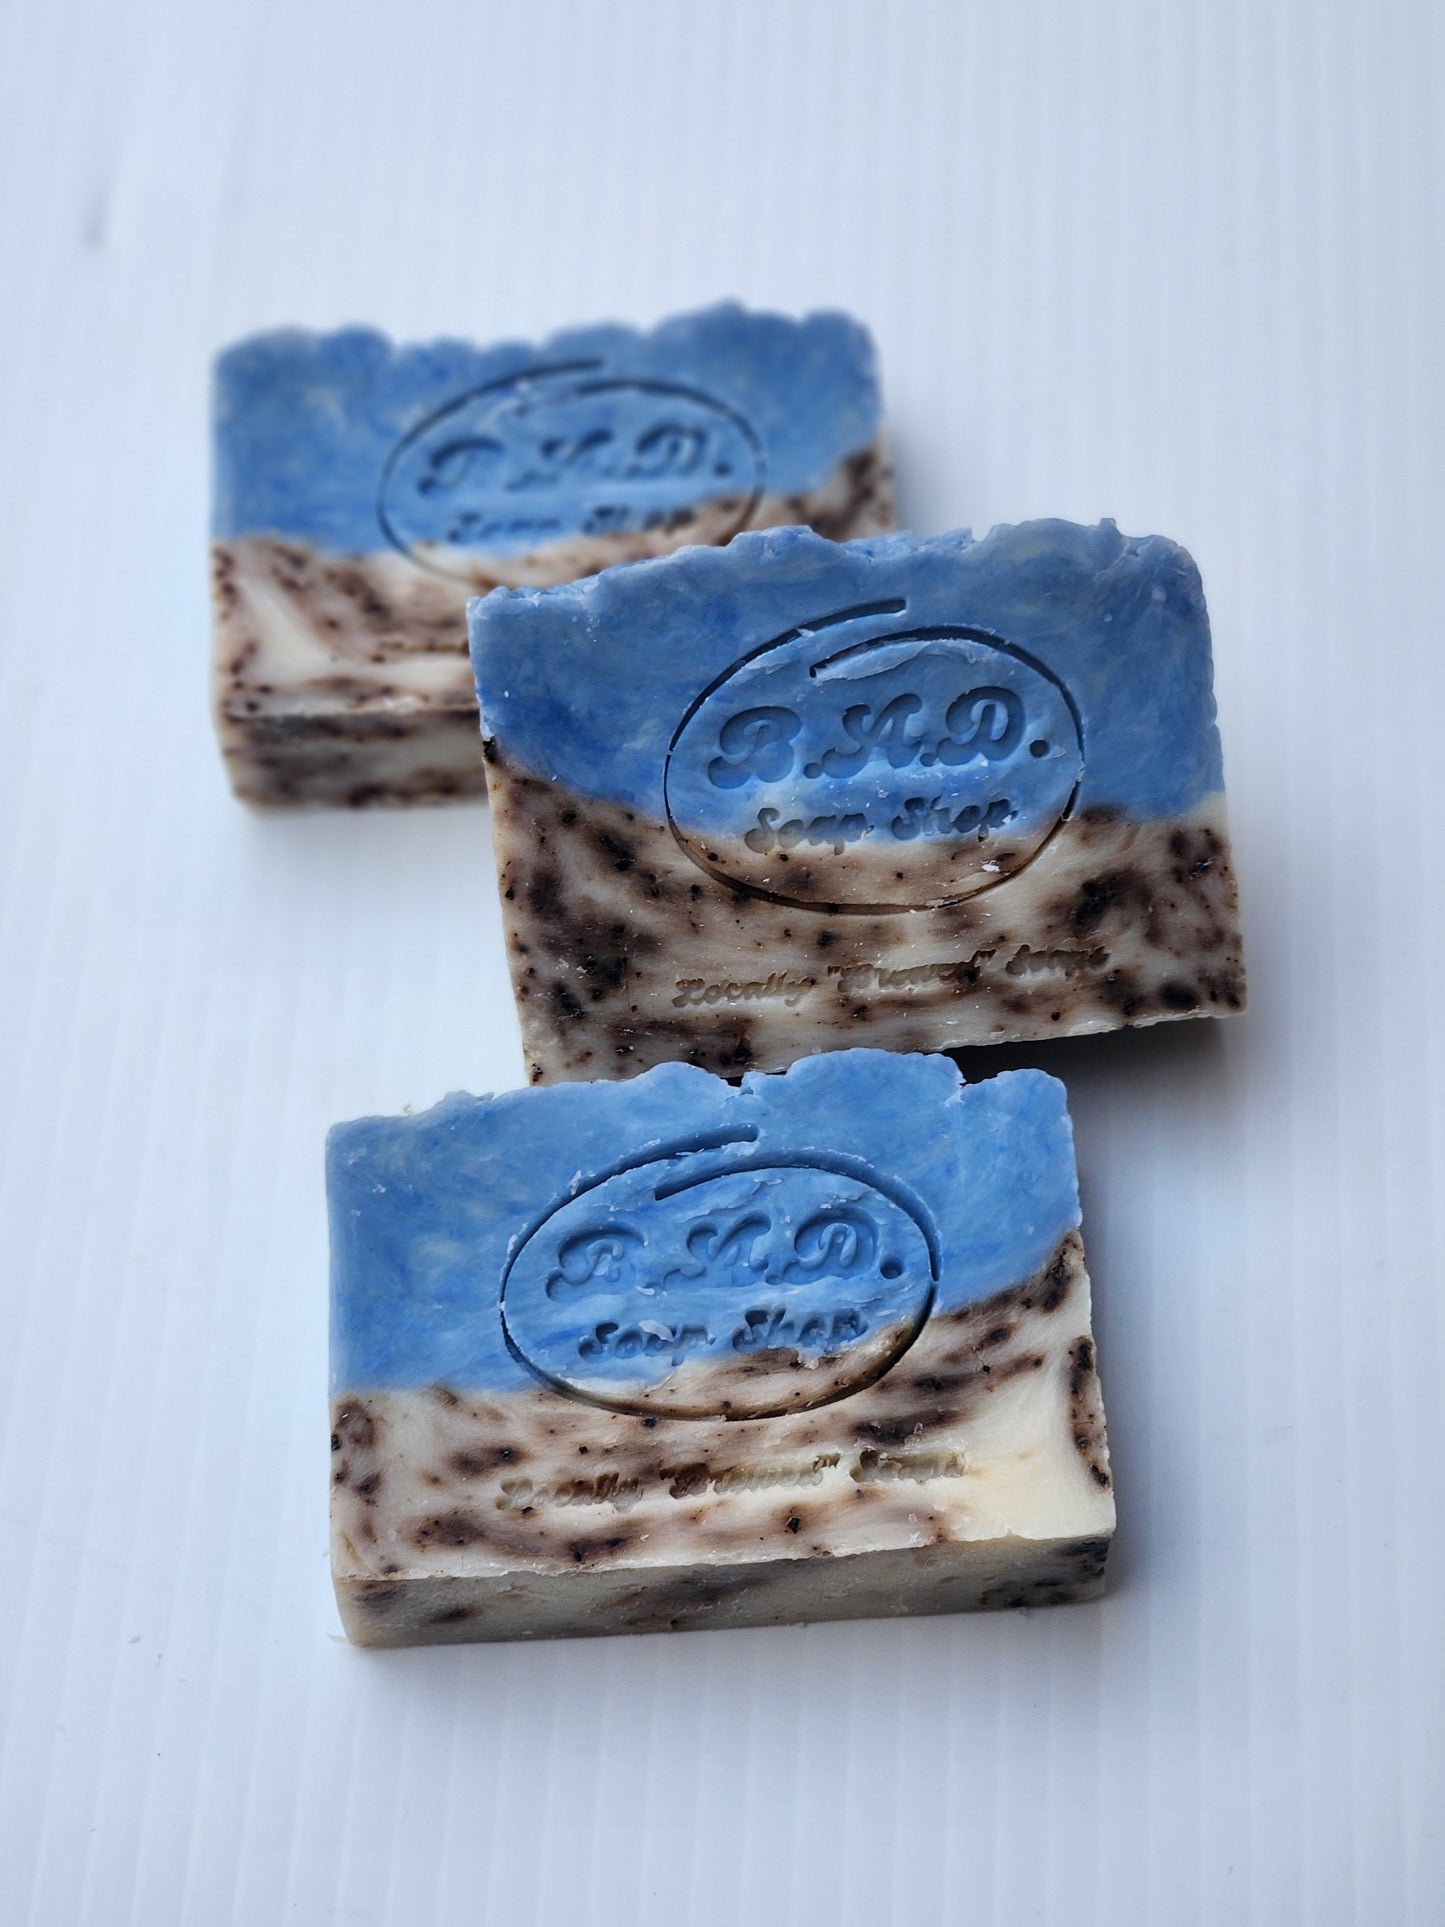 Natural "Beach Bum" Scented Handmade Soap with Ground Coffee for Exfoliation